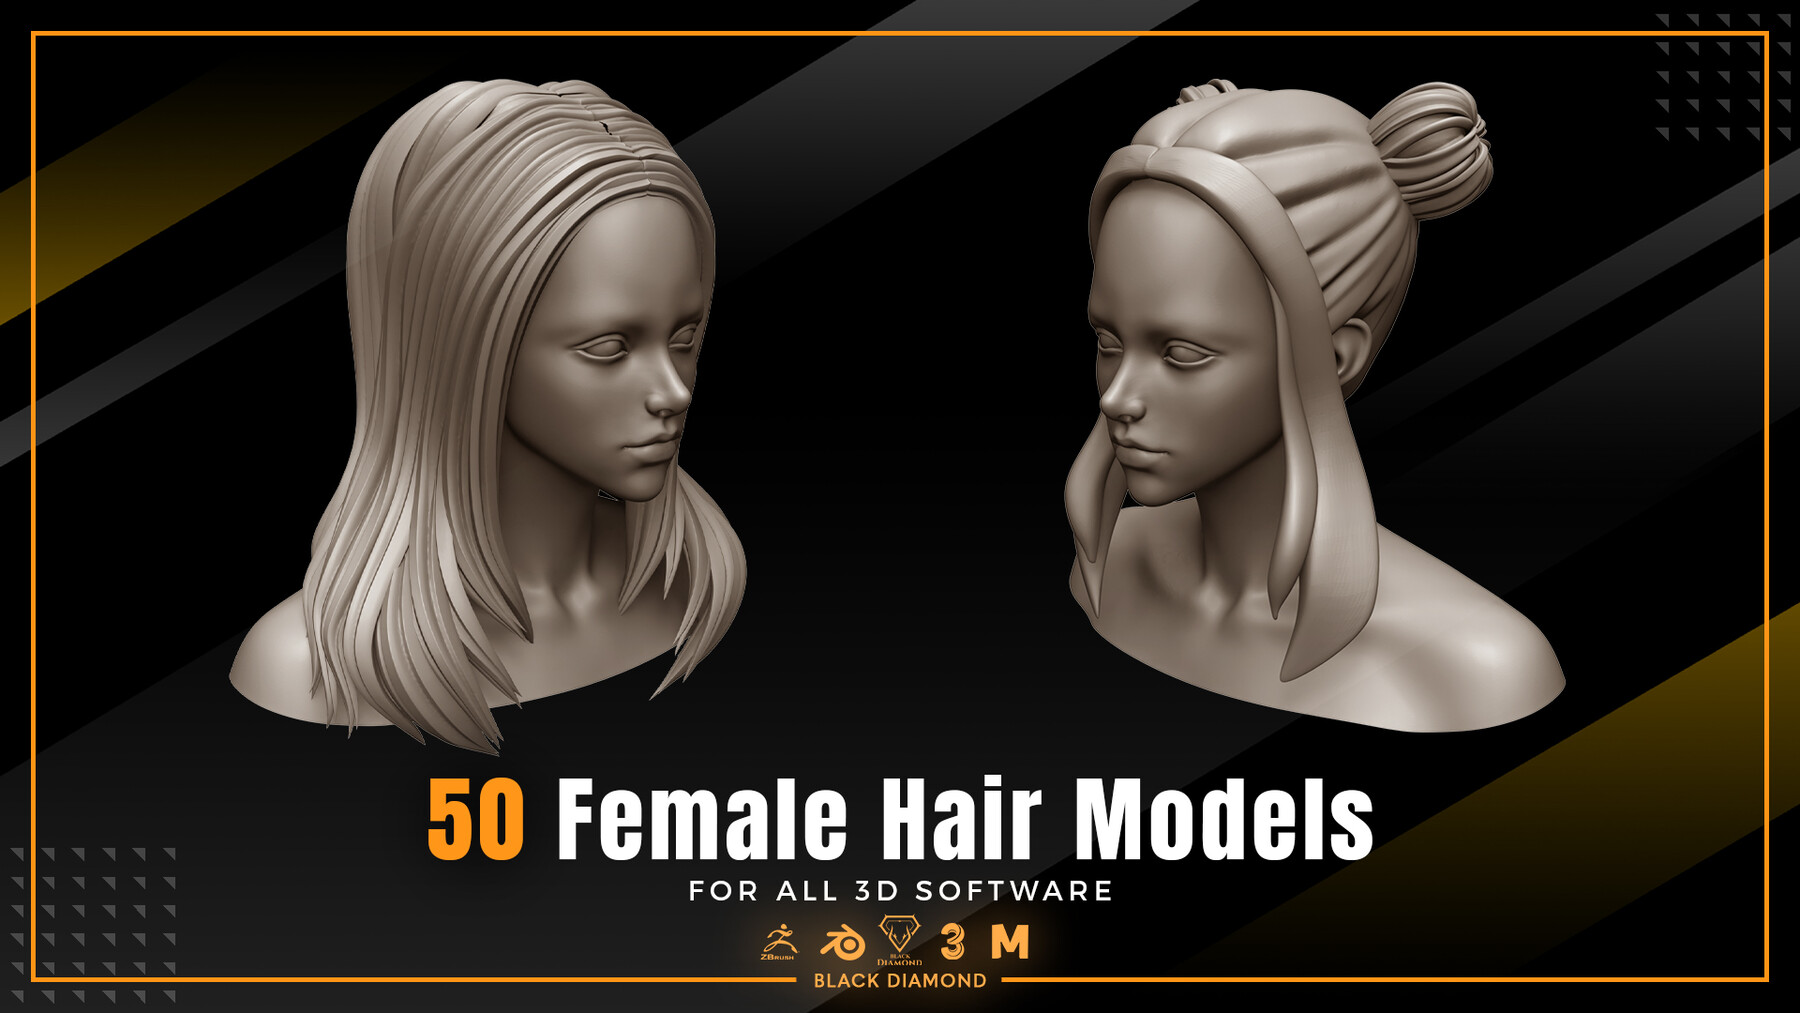 ArtStation - 50 Female Hair Models ( %60 OFF) FOR ALL 3D SOFTWARE |  Resources